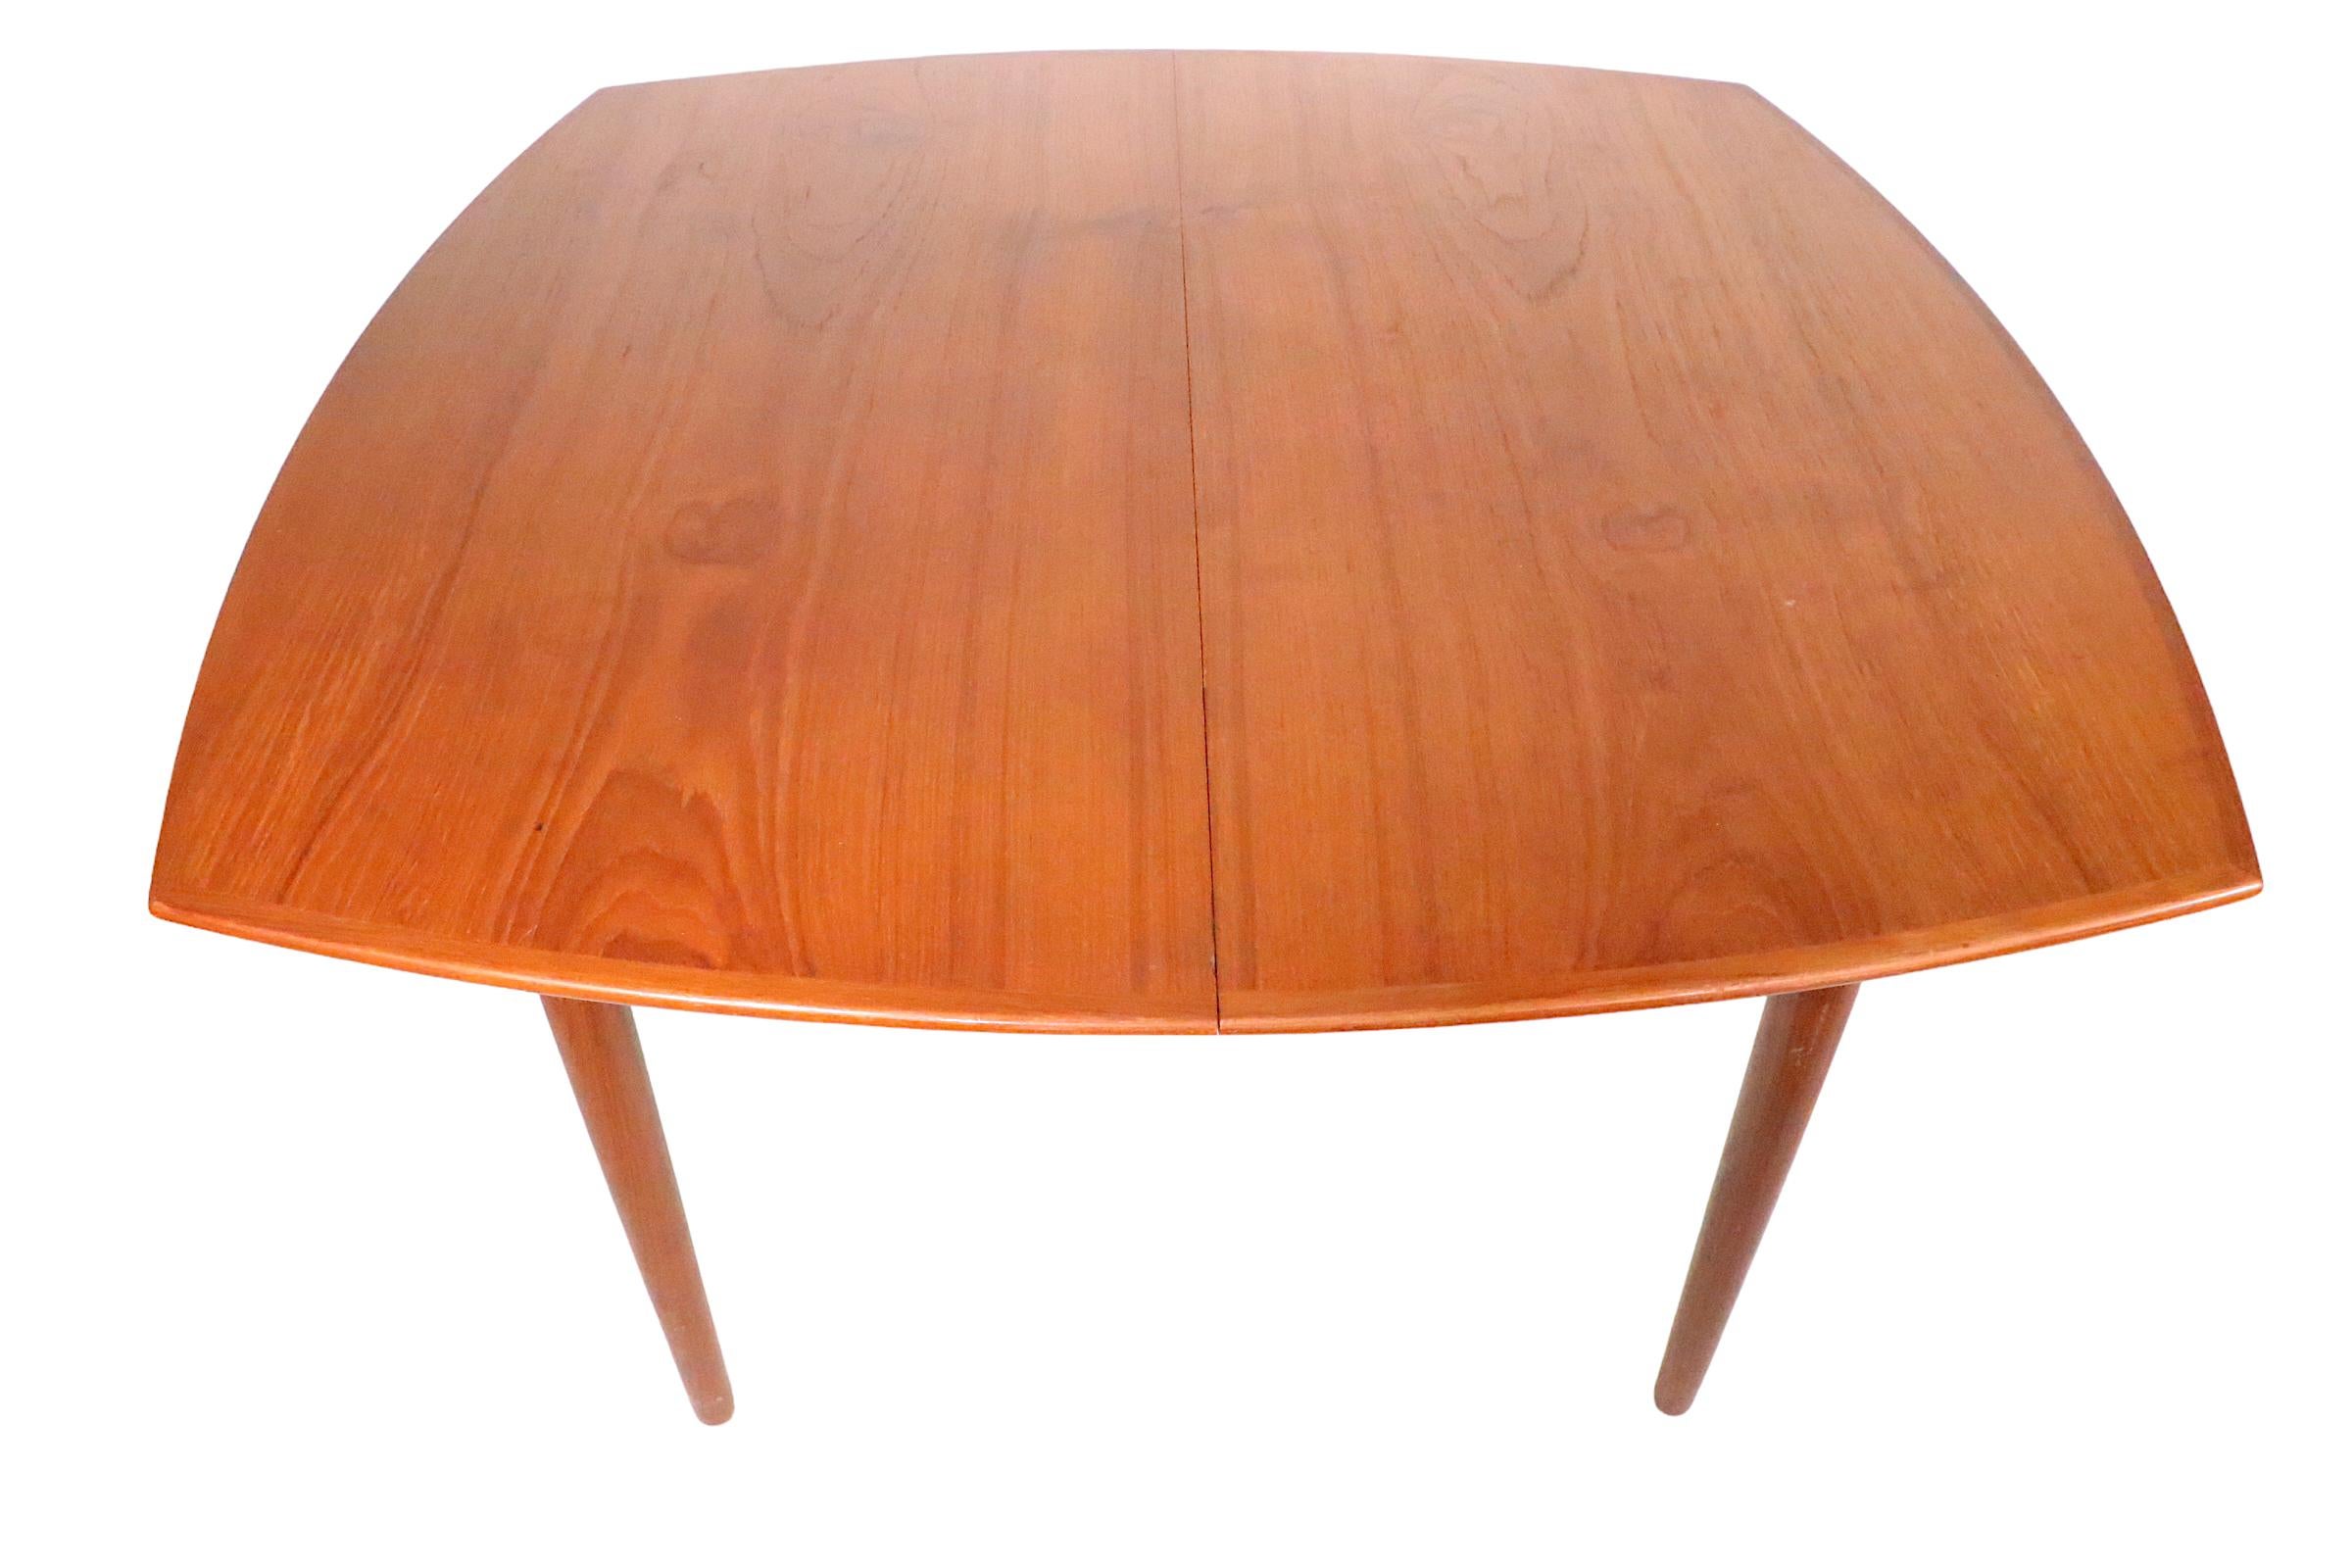 Danish Mid Century Modern Teak Extension  Dining Table by H W Klein  c 1950's For Sale 15